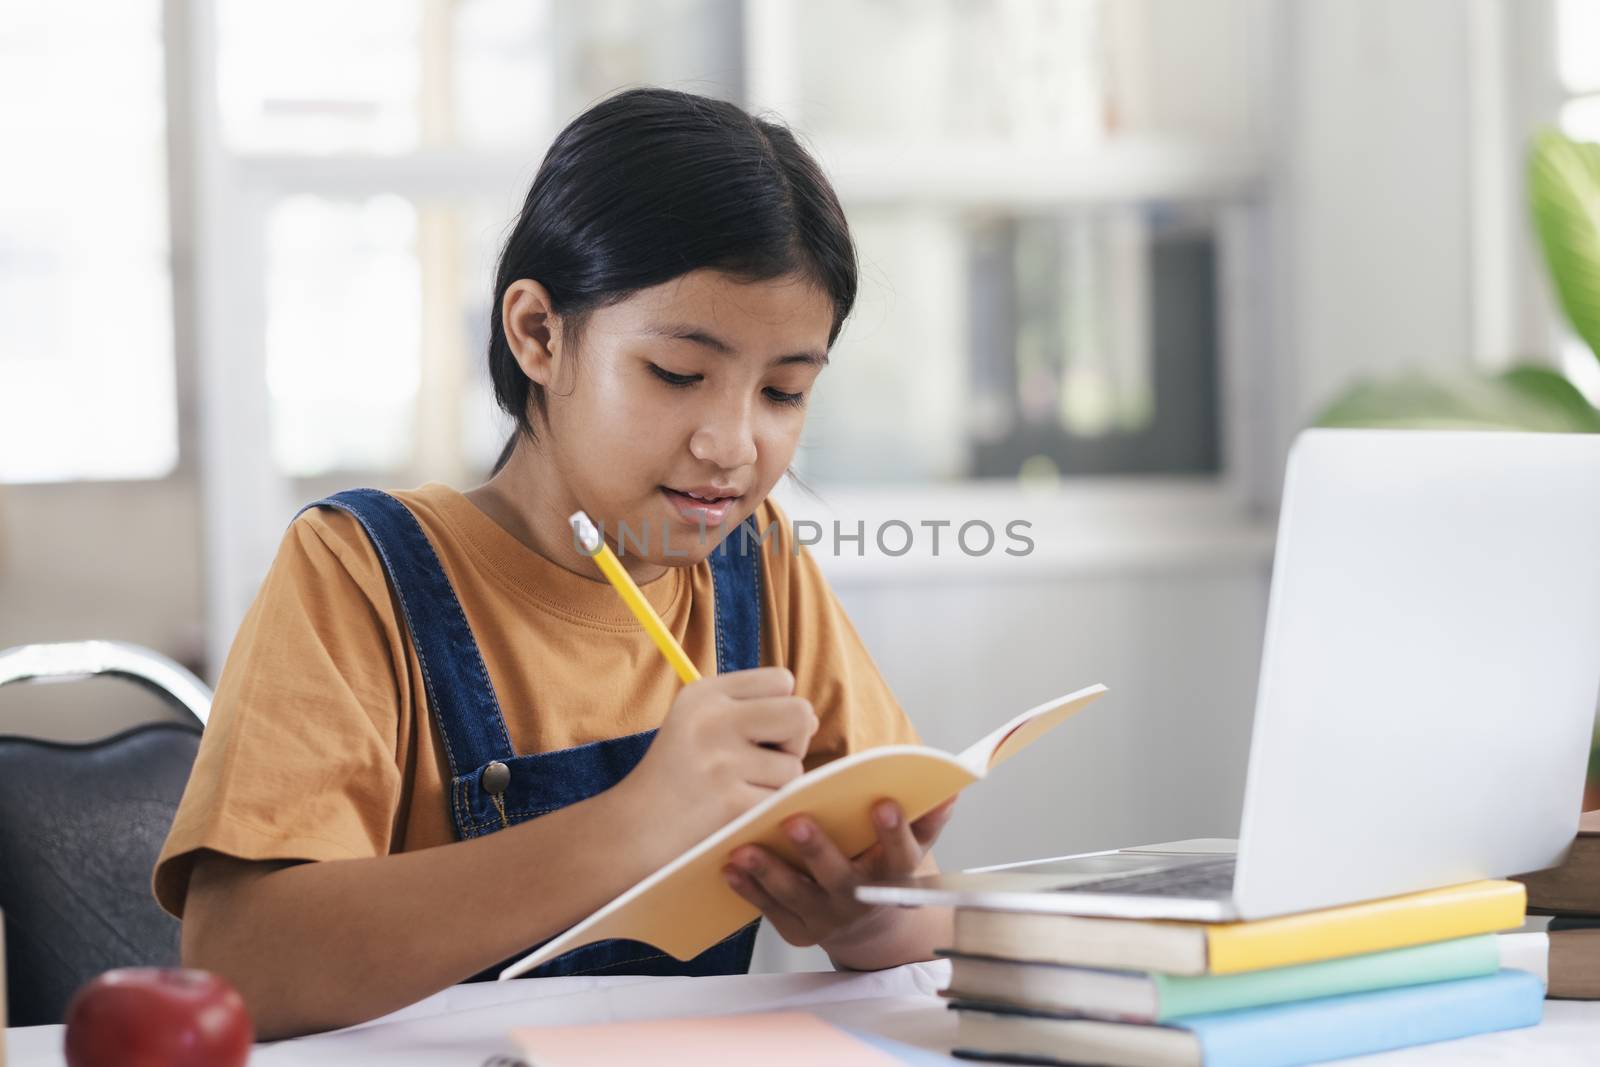 Happy asian girl learning online at home. Education and e-learning concept.